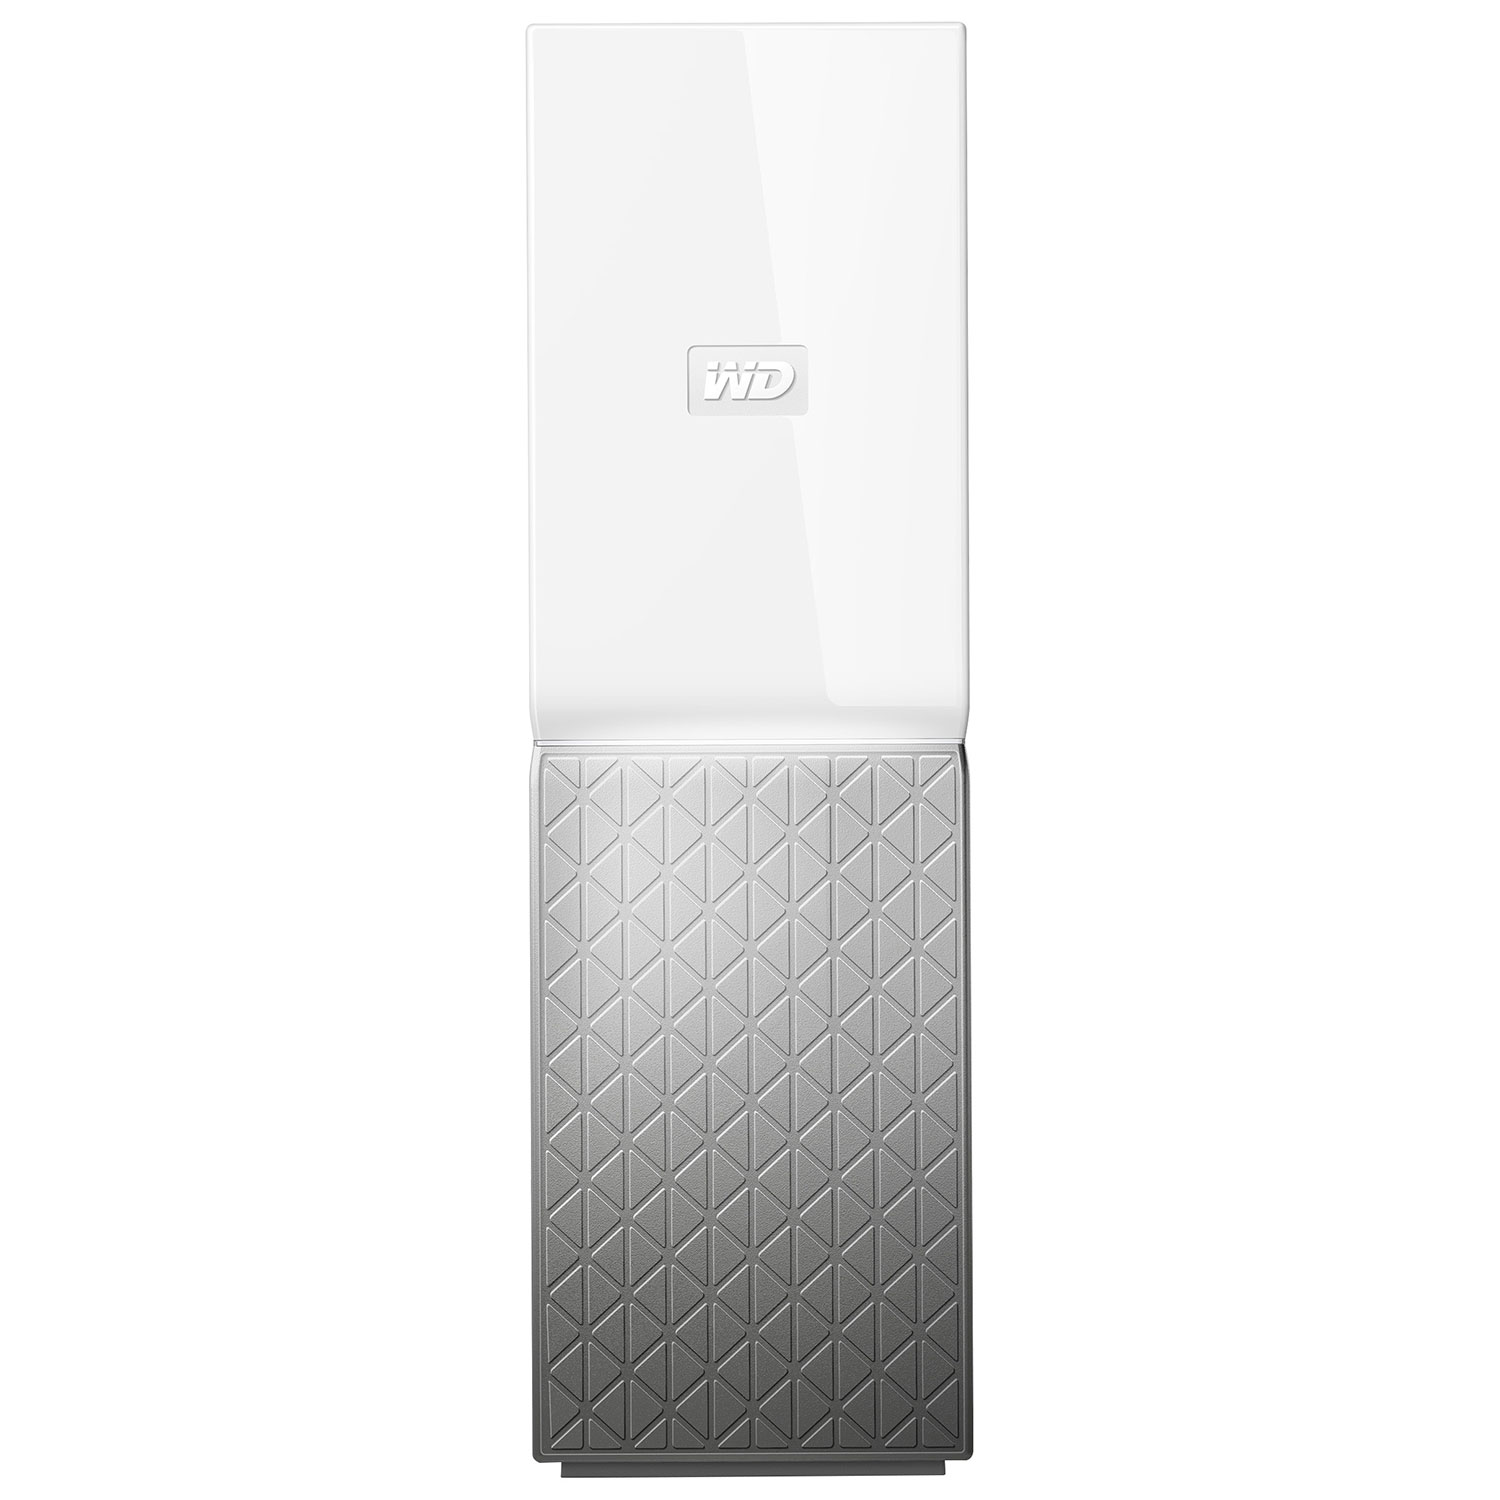 WD My Cloud Home 4TB Personal Cloud